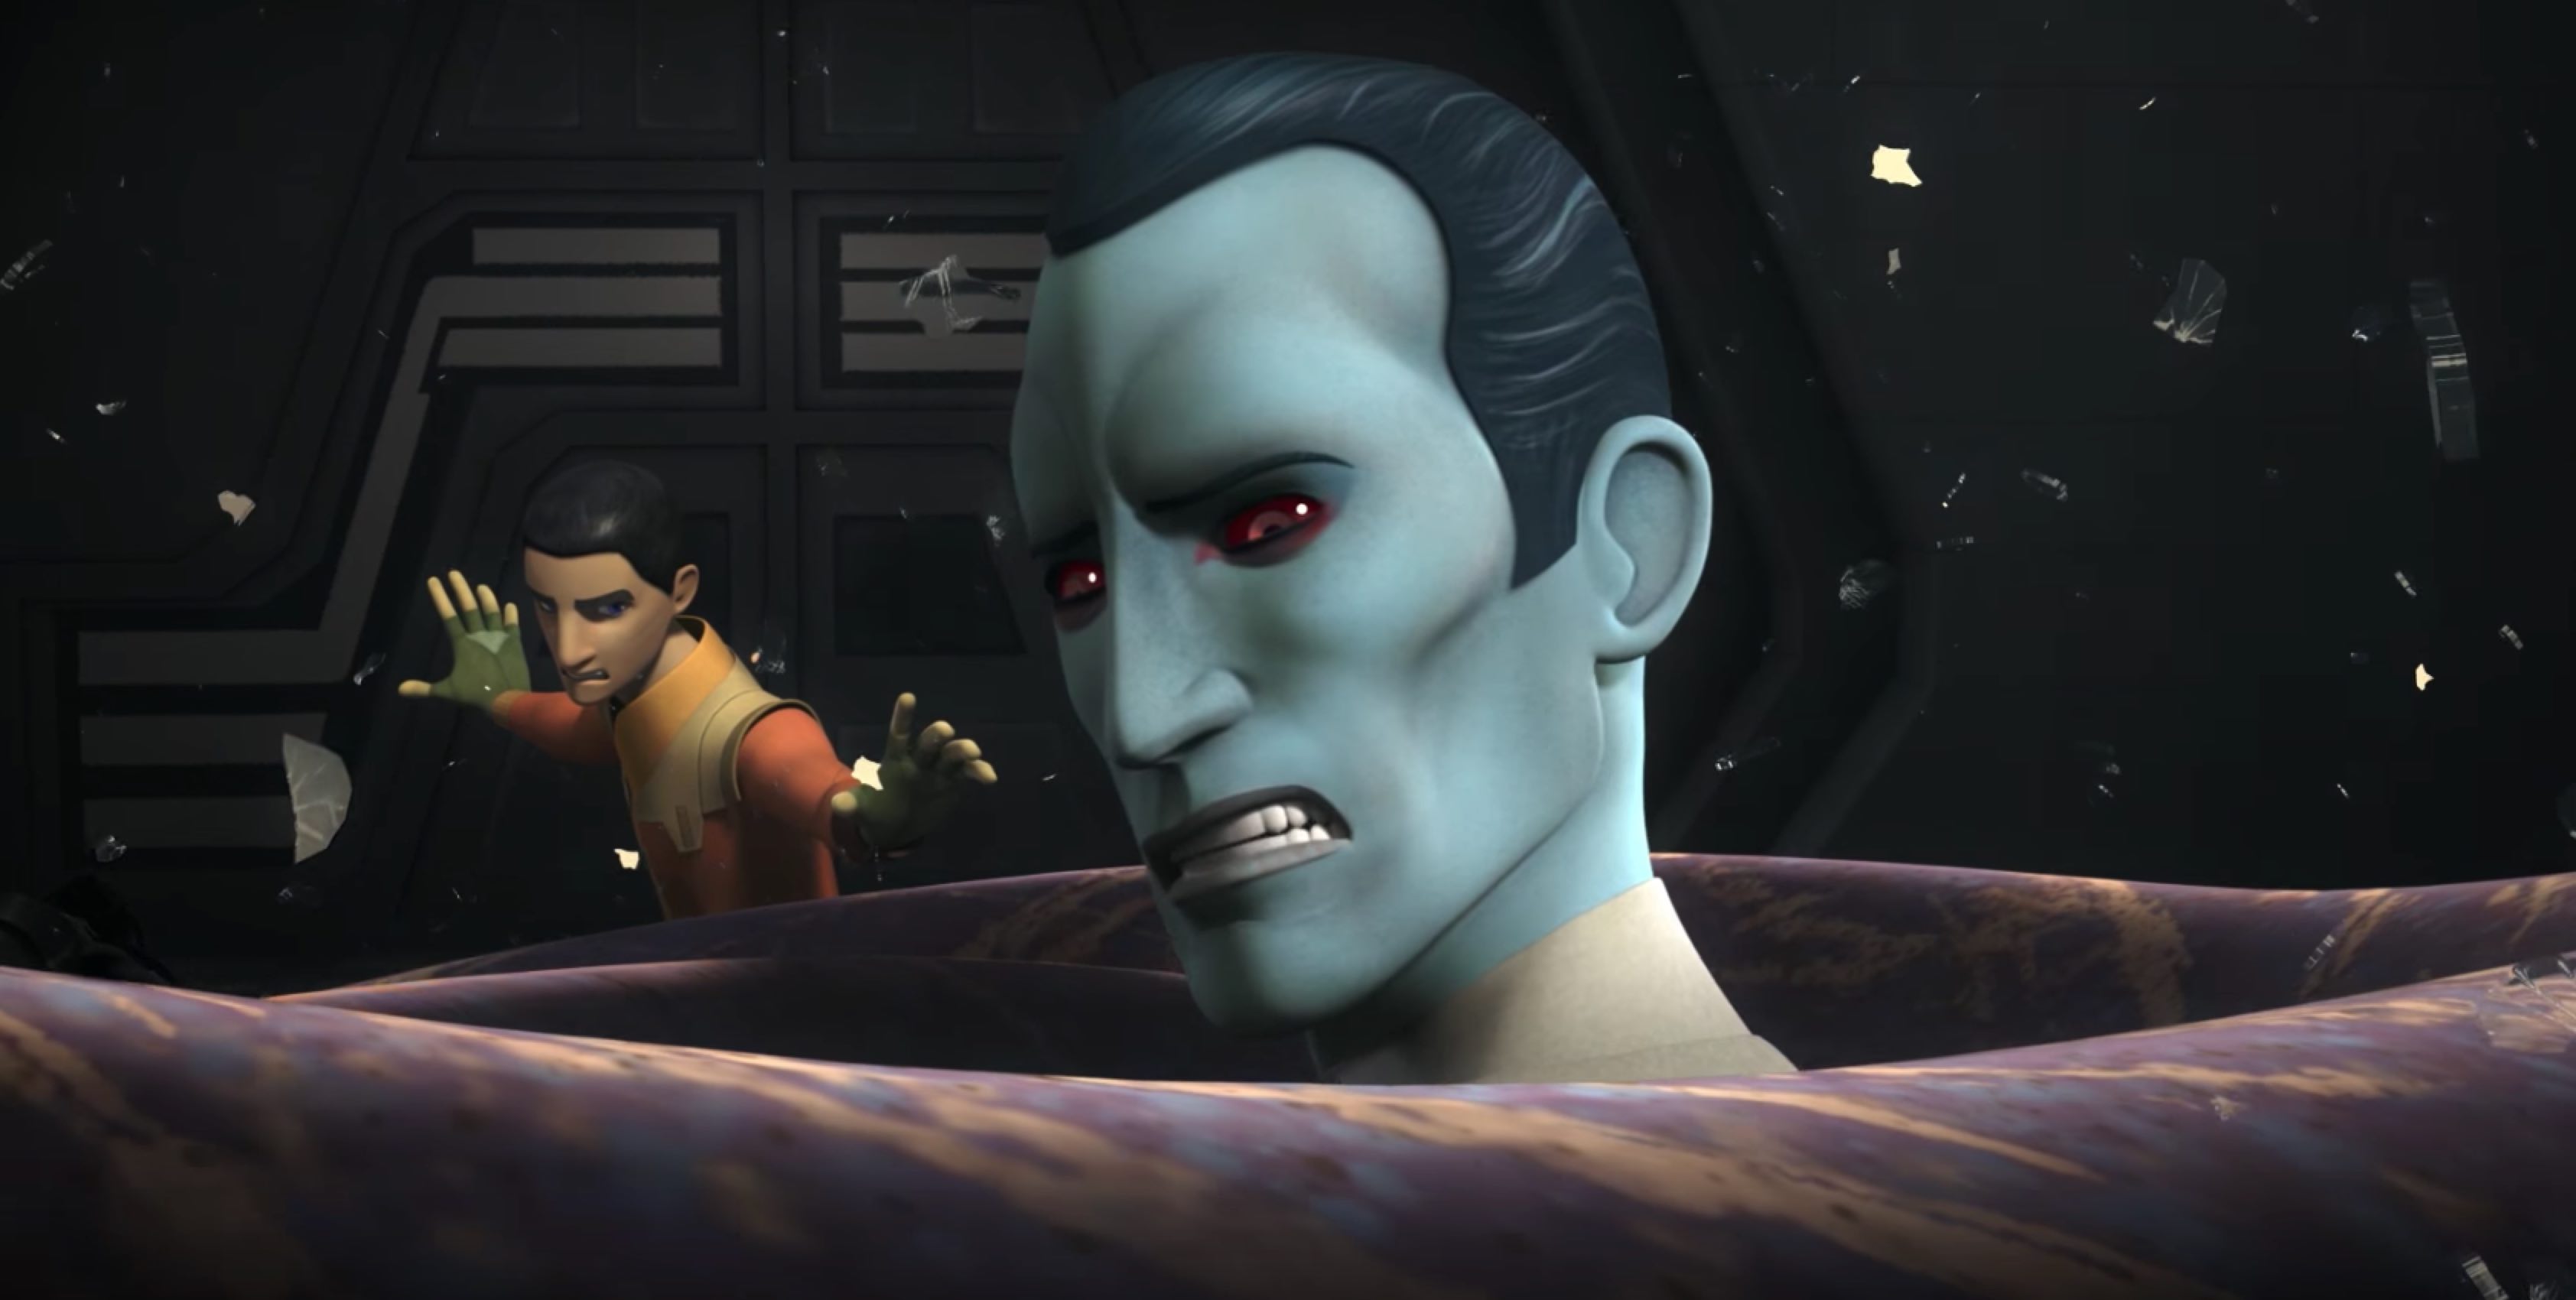 What The Star Wars Rebels Ending Means For The Future Of Star Wars